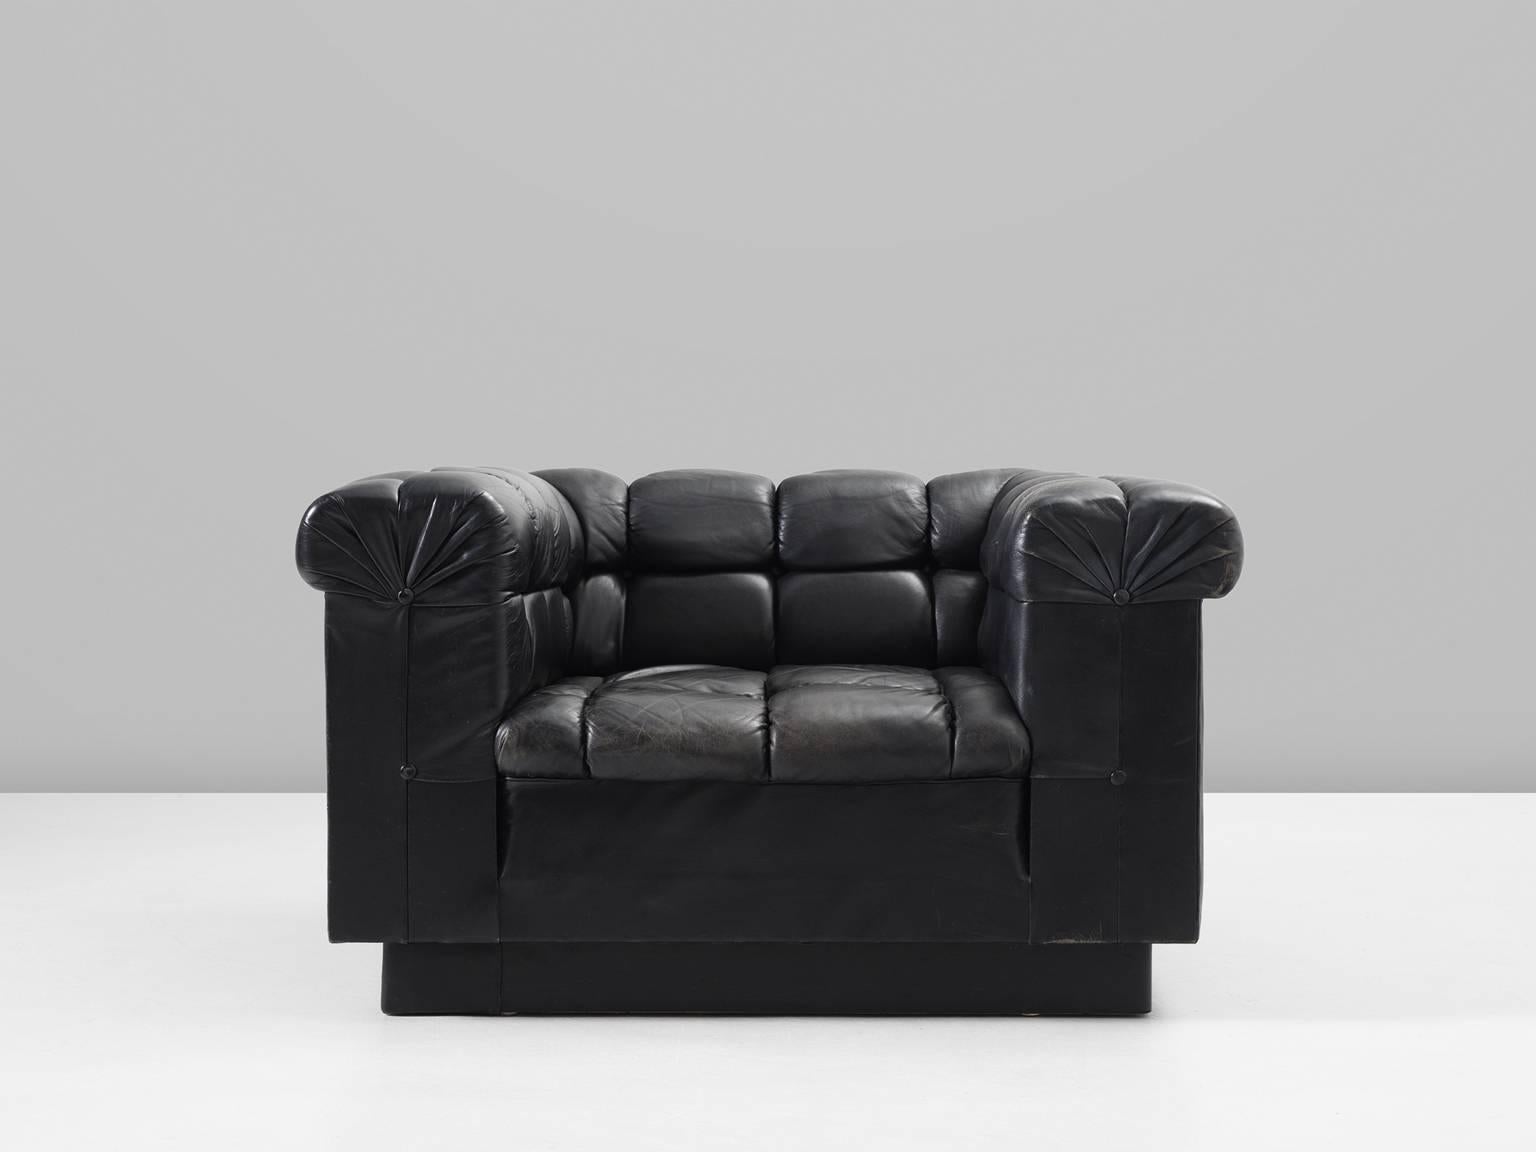 Edward Wormley for Dunbar, lounge chair in leather, United States, 1950s.

Black leather 'Party Chair' by American designer Edward Wormley. This armchair has an interesting appearance of a classic chesterfield chair with a modern aesthetic. The